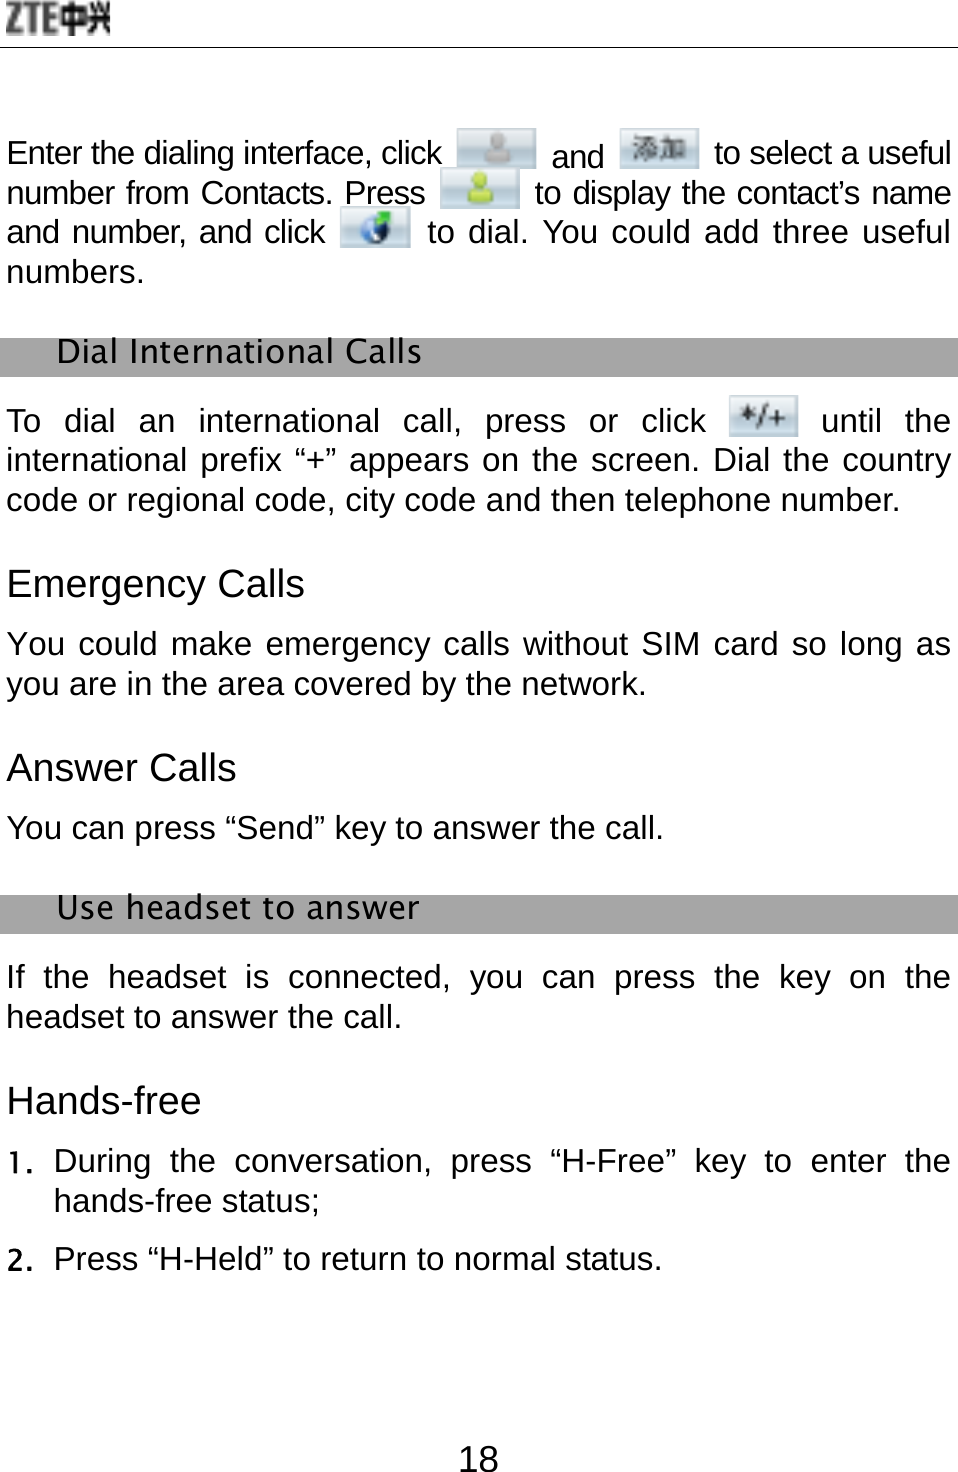  18 Enter the dialing interface, click   and   to select a useful number from Contacts. Press   to display the contact’s name and number, and click   to dial. You could add three useful numbers. Dial International Calls To dial an international call, press or click   until  the international prefix “+” appears on the screen. Dial the country code or regional code, city code and then telephone number. Emergency Calls You could make emergency calls without SIM card so long as you are in the area covered by the network.   Answer Calls You can press “Send” key to answer the call.   Use headset to answer If the headset is connected, you can press the key on the headset to answer the call. Hands-free  1. During the conversation, press “H-Free” key to enter the hands-free status;   2. Press “H-Held” to return to normal status. 